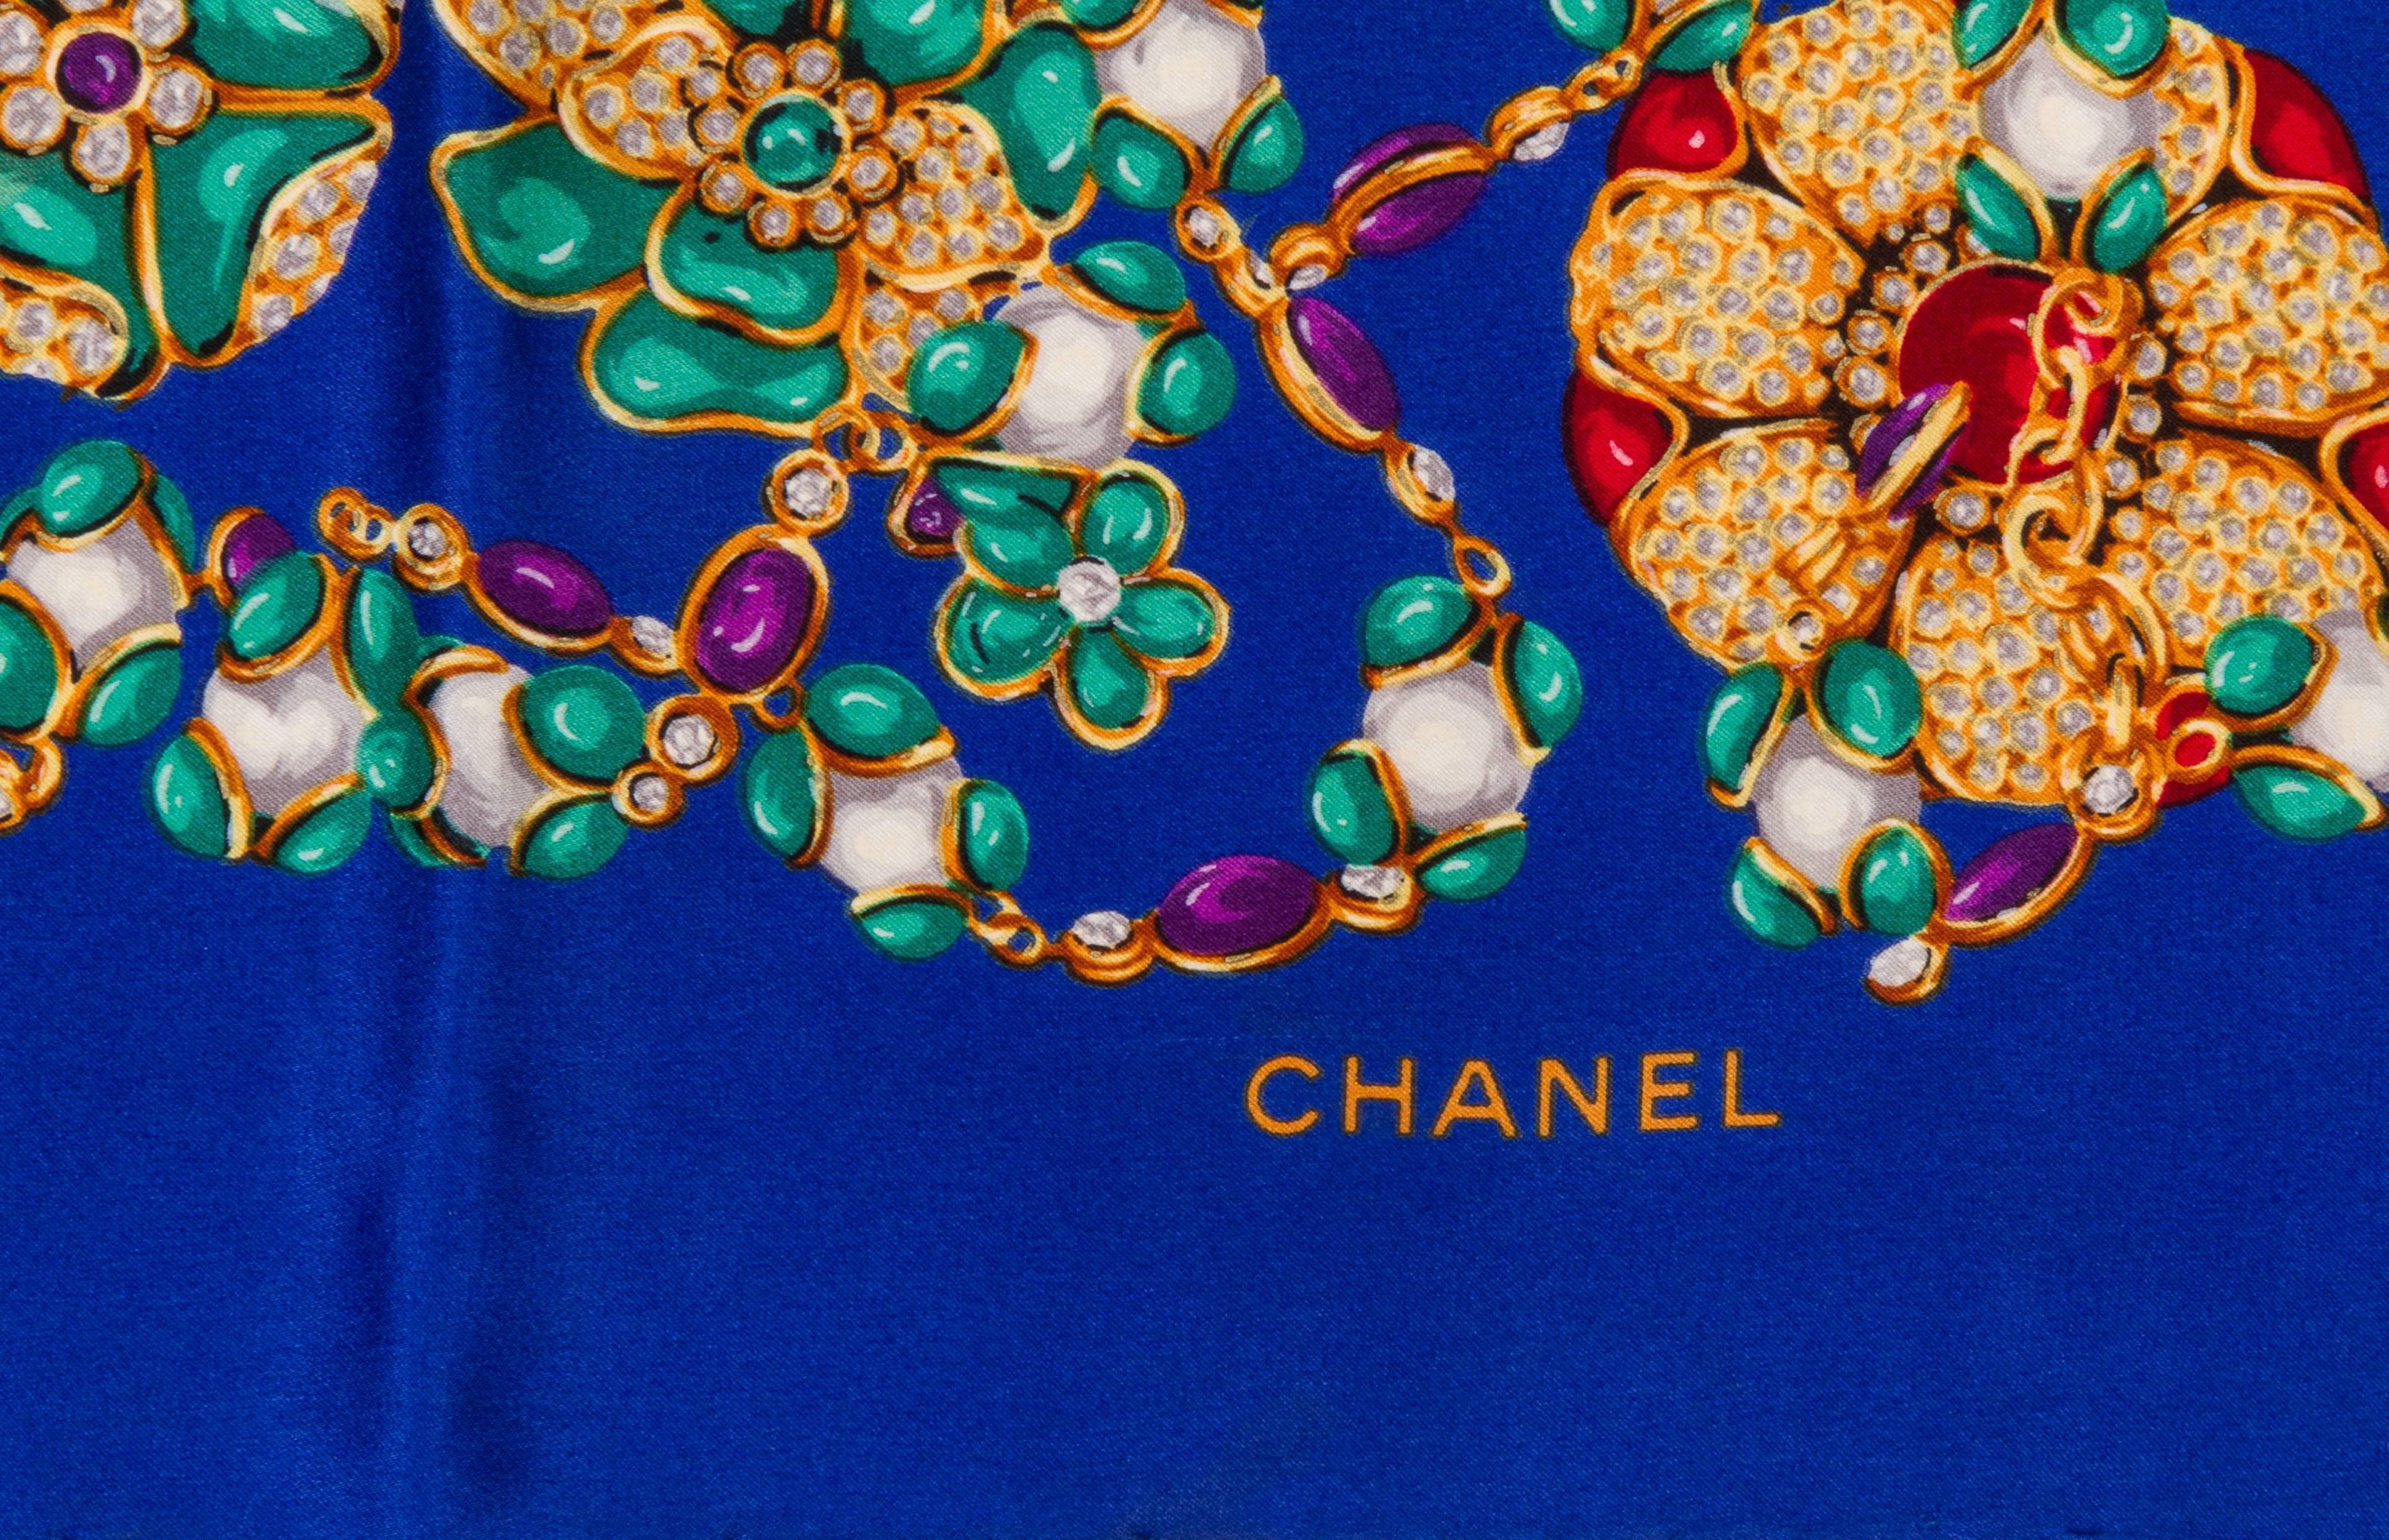 Chanel electric blue silk twill scarf with multi colored jeweled stones. Hand rolled edges. Does not include box. 